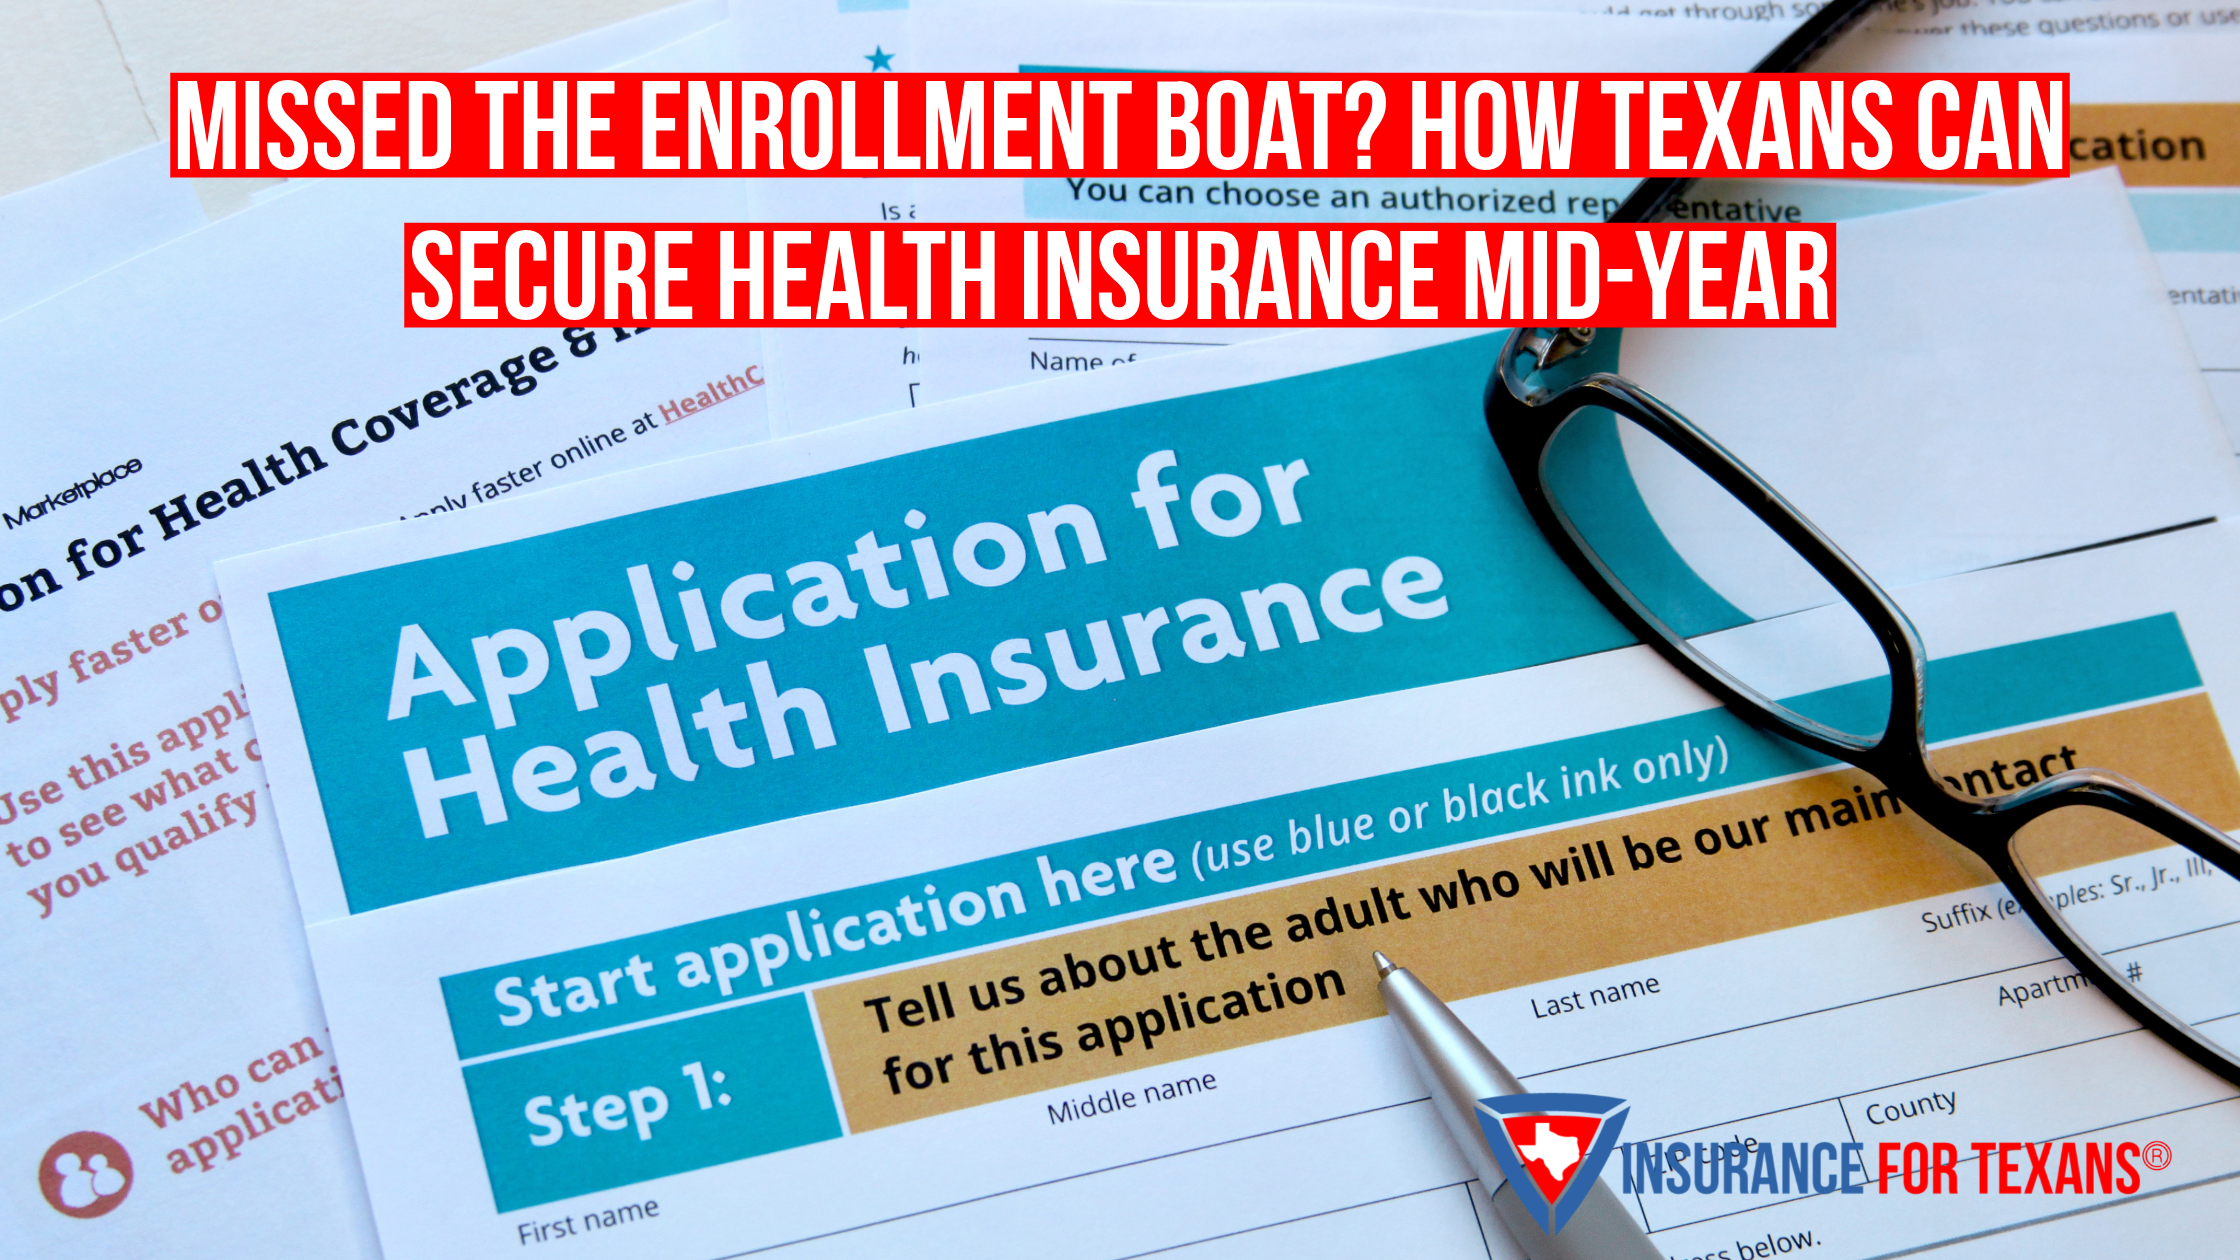 Missed the Enrollment Boat? How Texans Can Secure Health Insurance Mid-Year